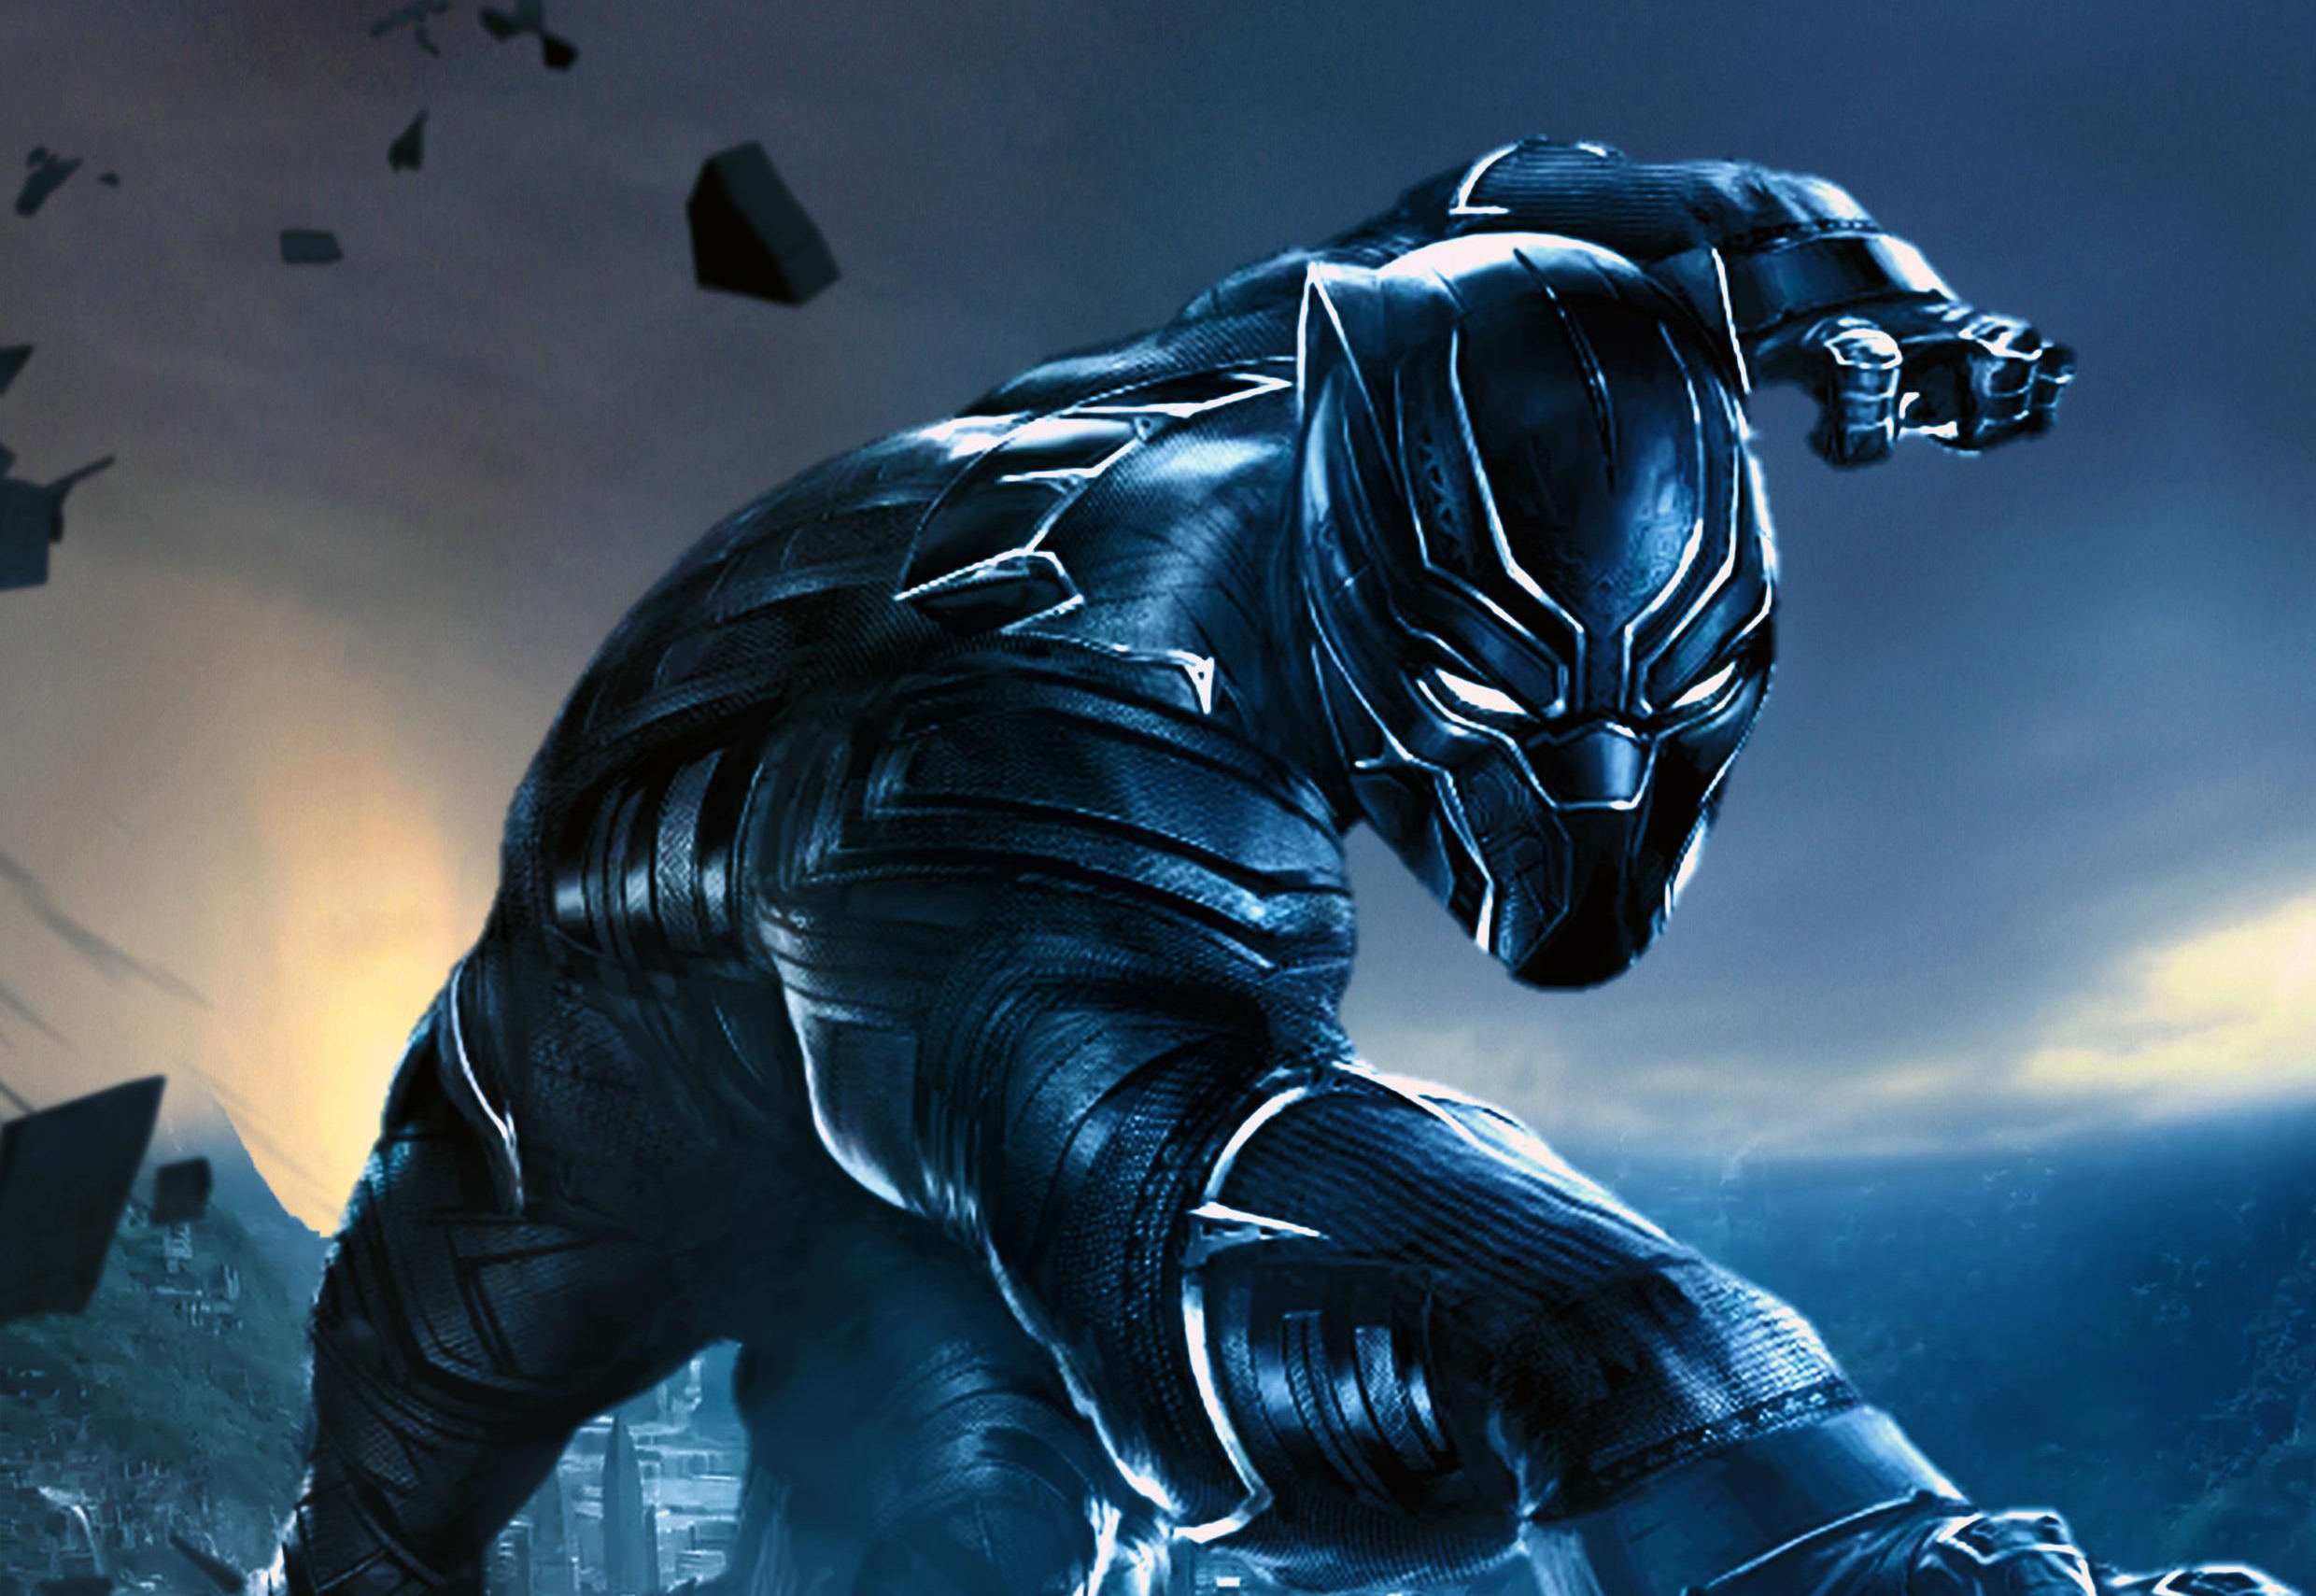 Black Panther Wallpaper Download For Mobile